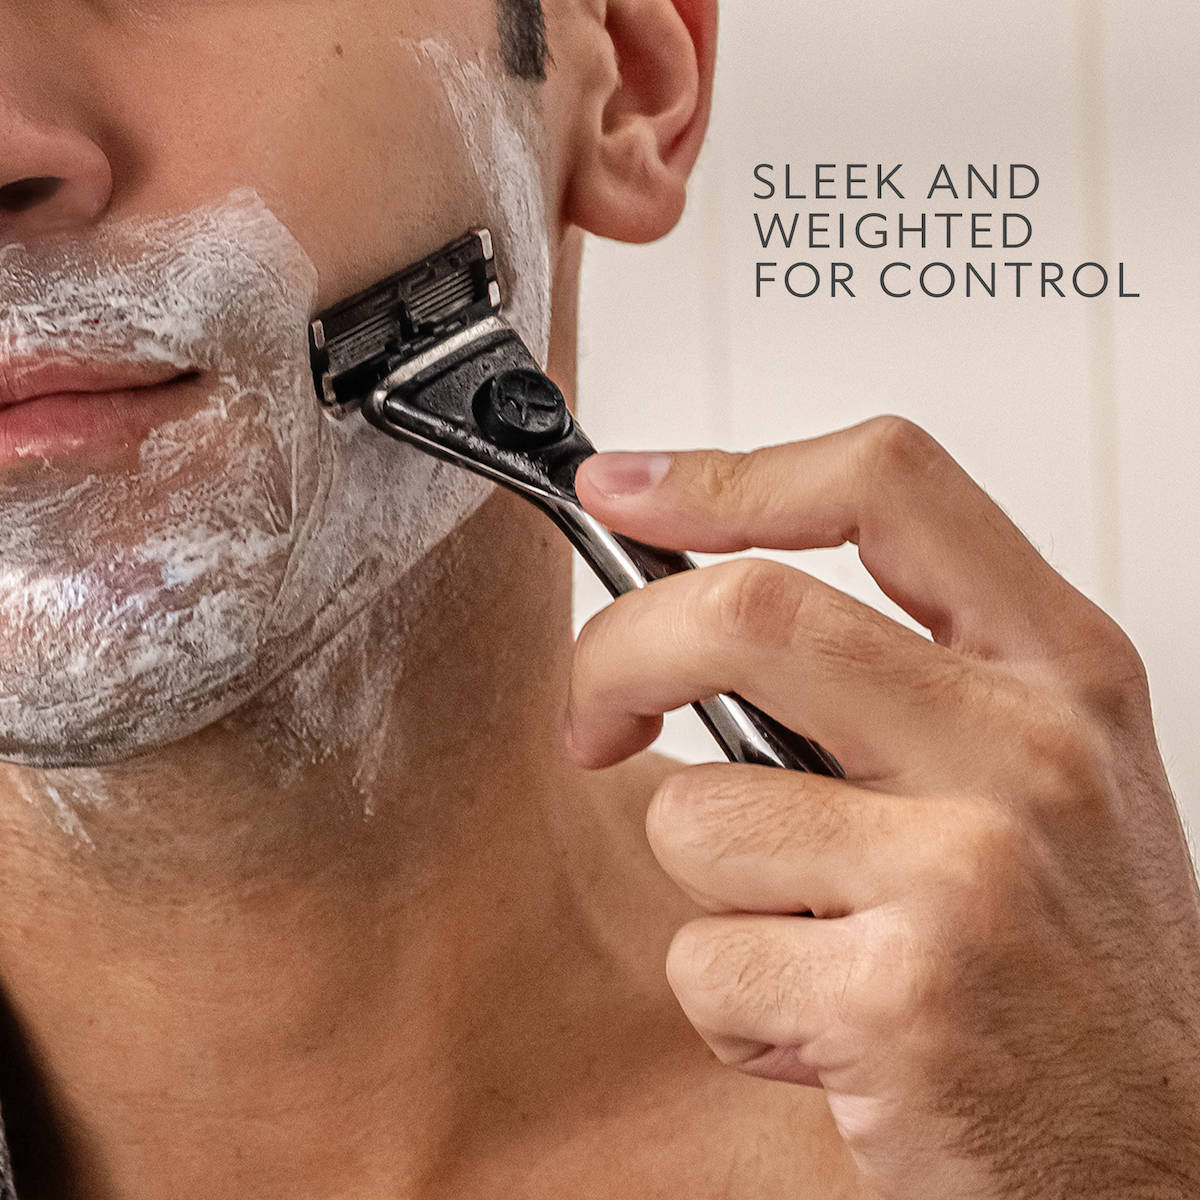 Dollar Shave Club Heavy Metal Handle is sleek and weighted for control.